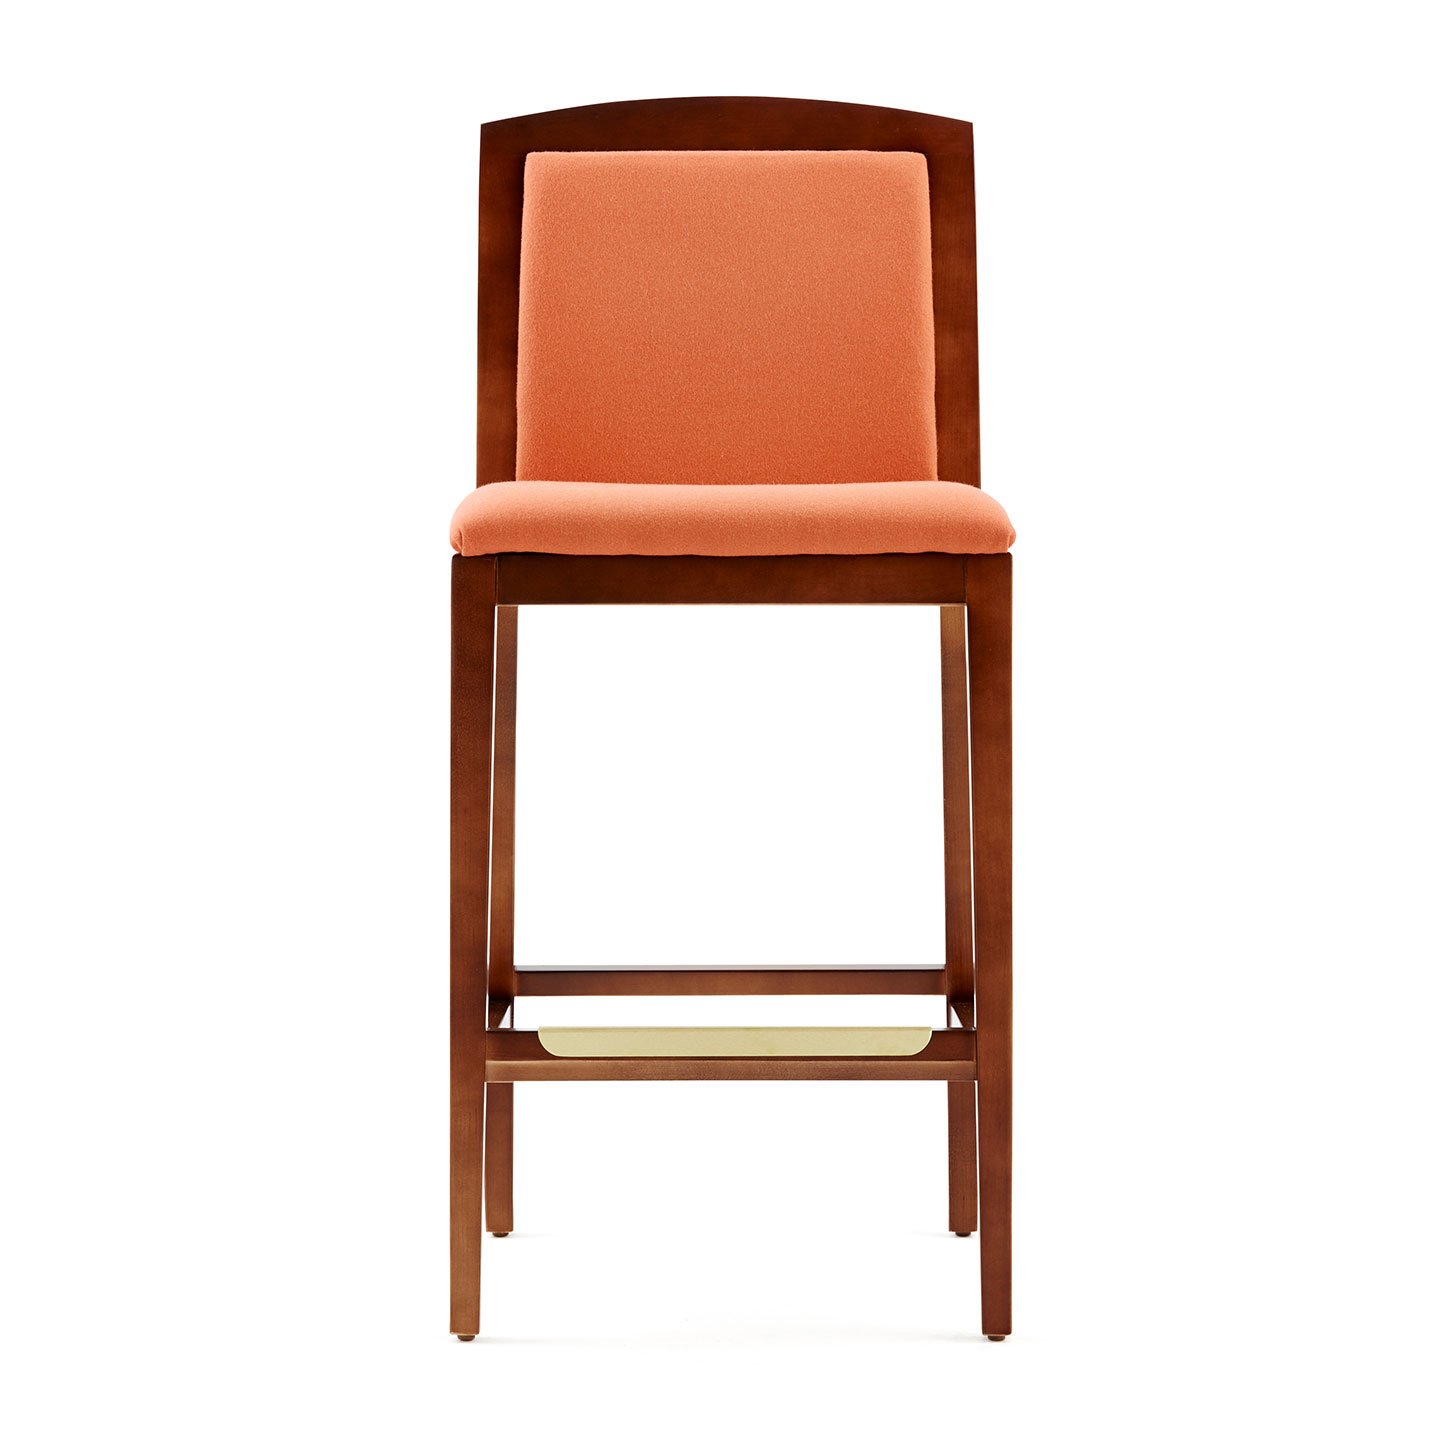 Haworth Composites stool in orange fabric and dark wooden body and legs